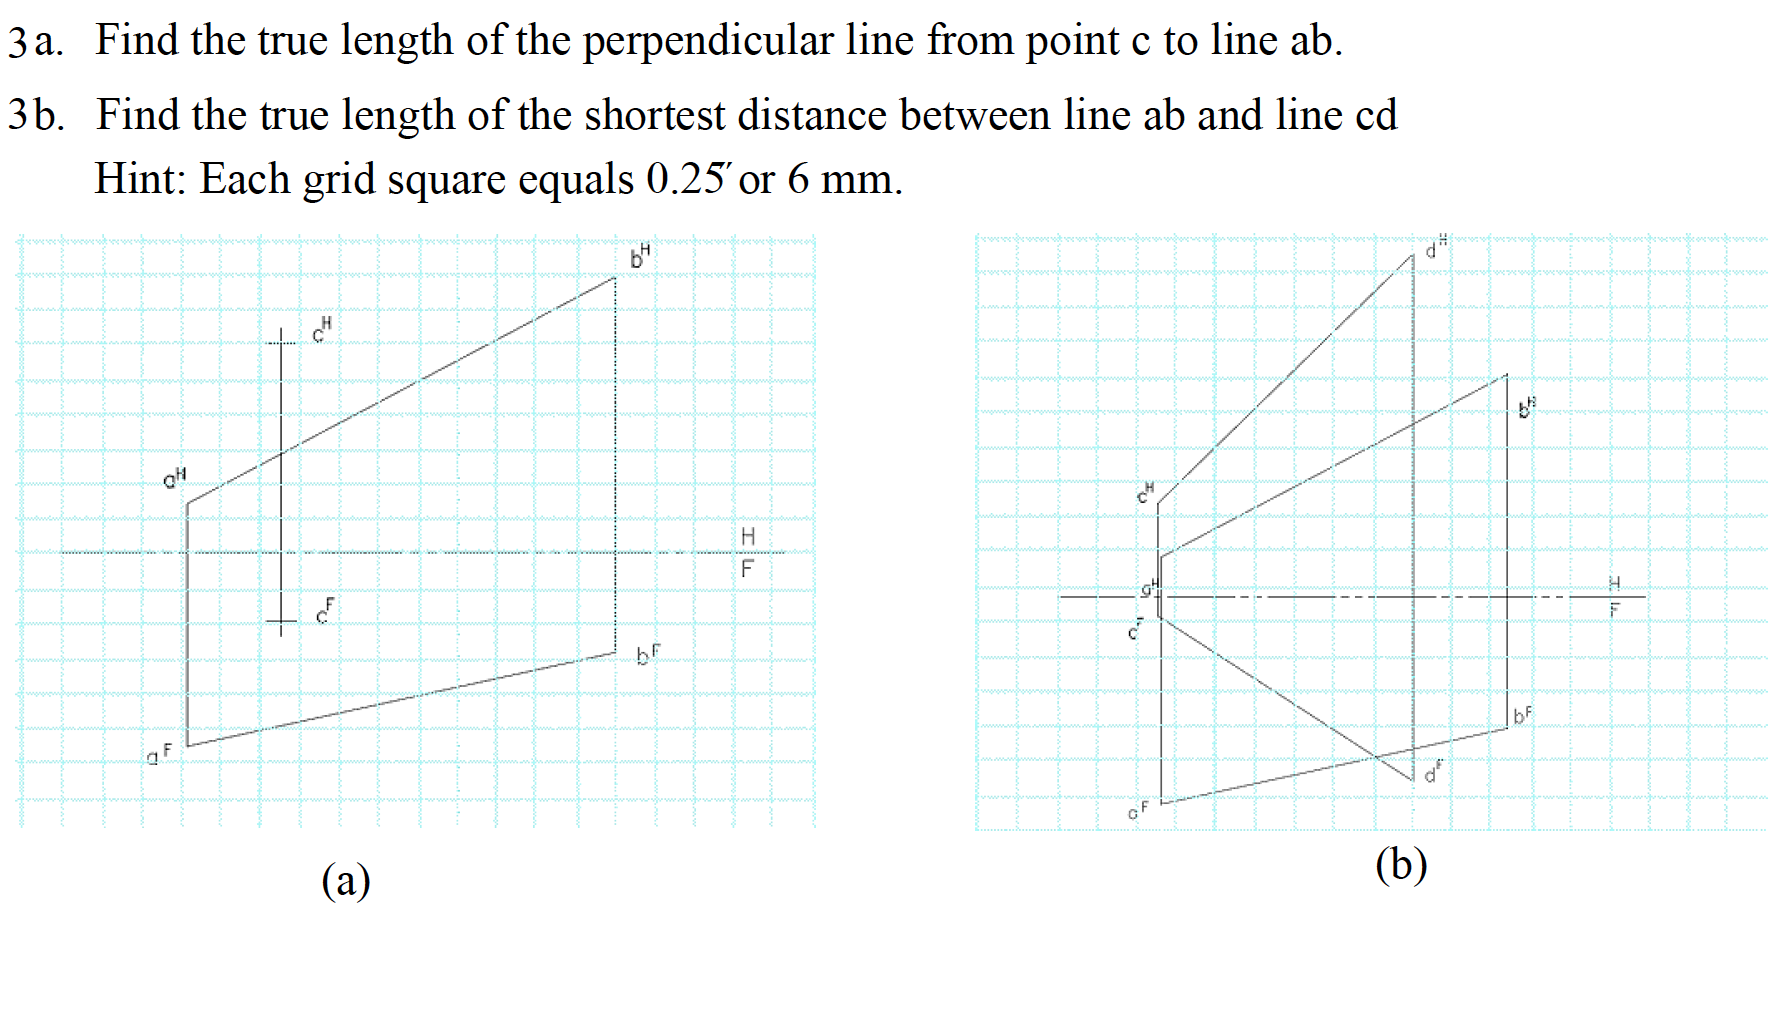 a. Find the true length of the perpendicular line from point \( \mathrm{c} \) to line ab.
b. Find the true length of the shor